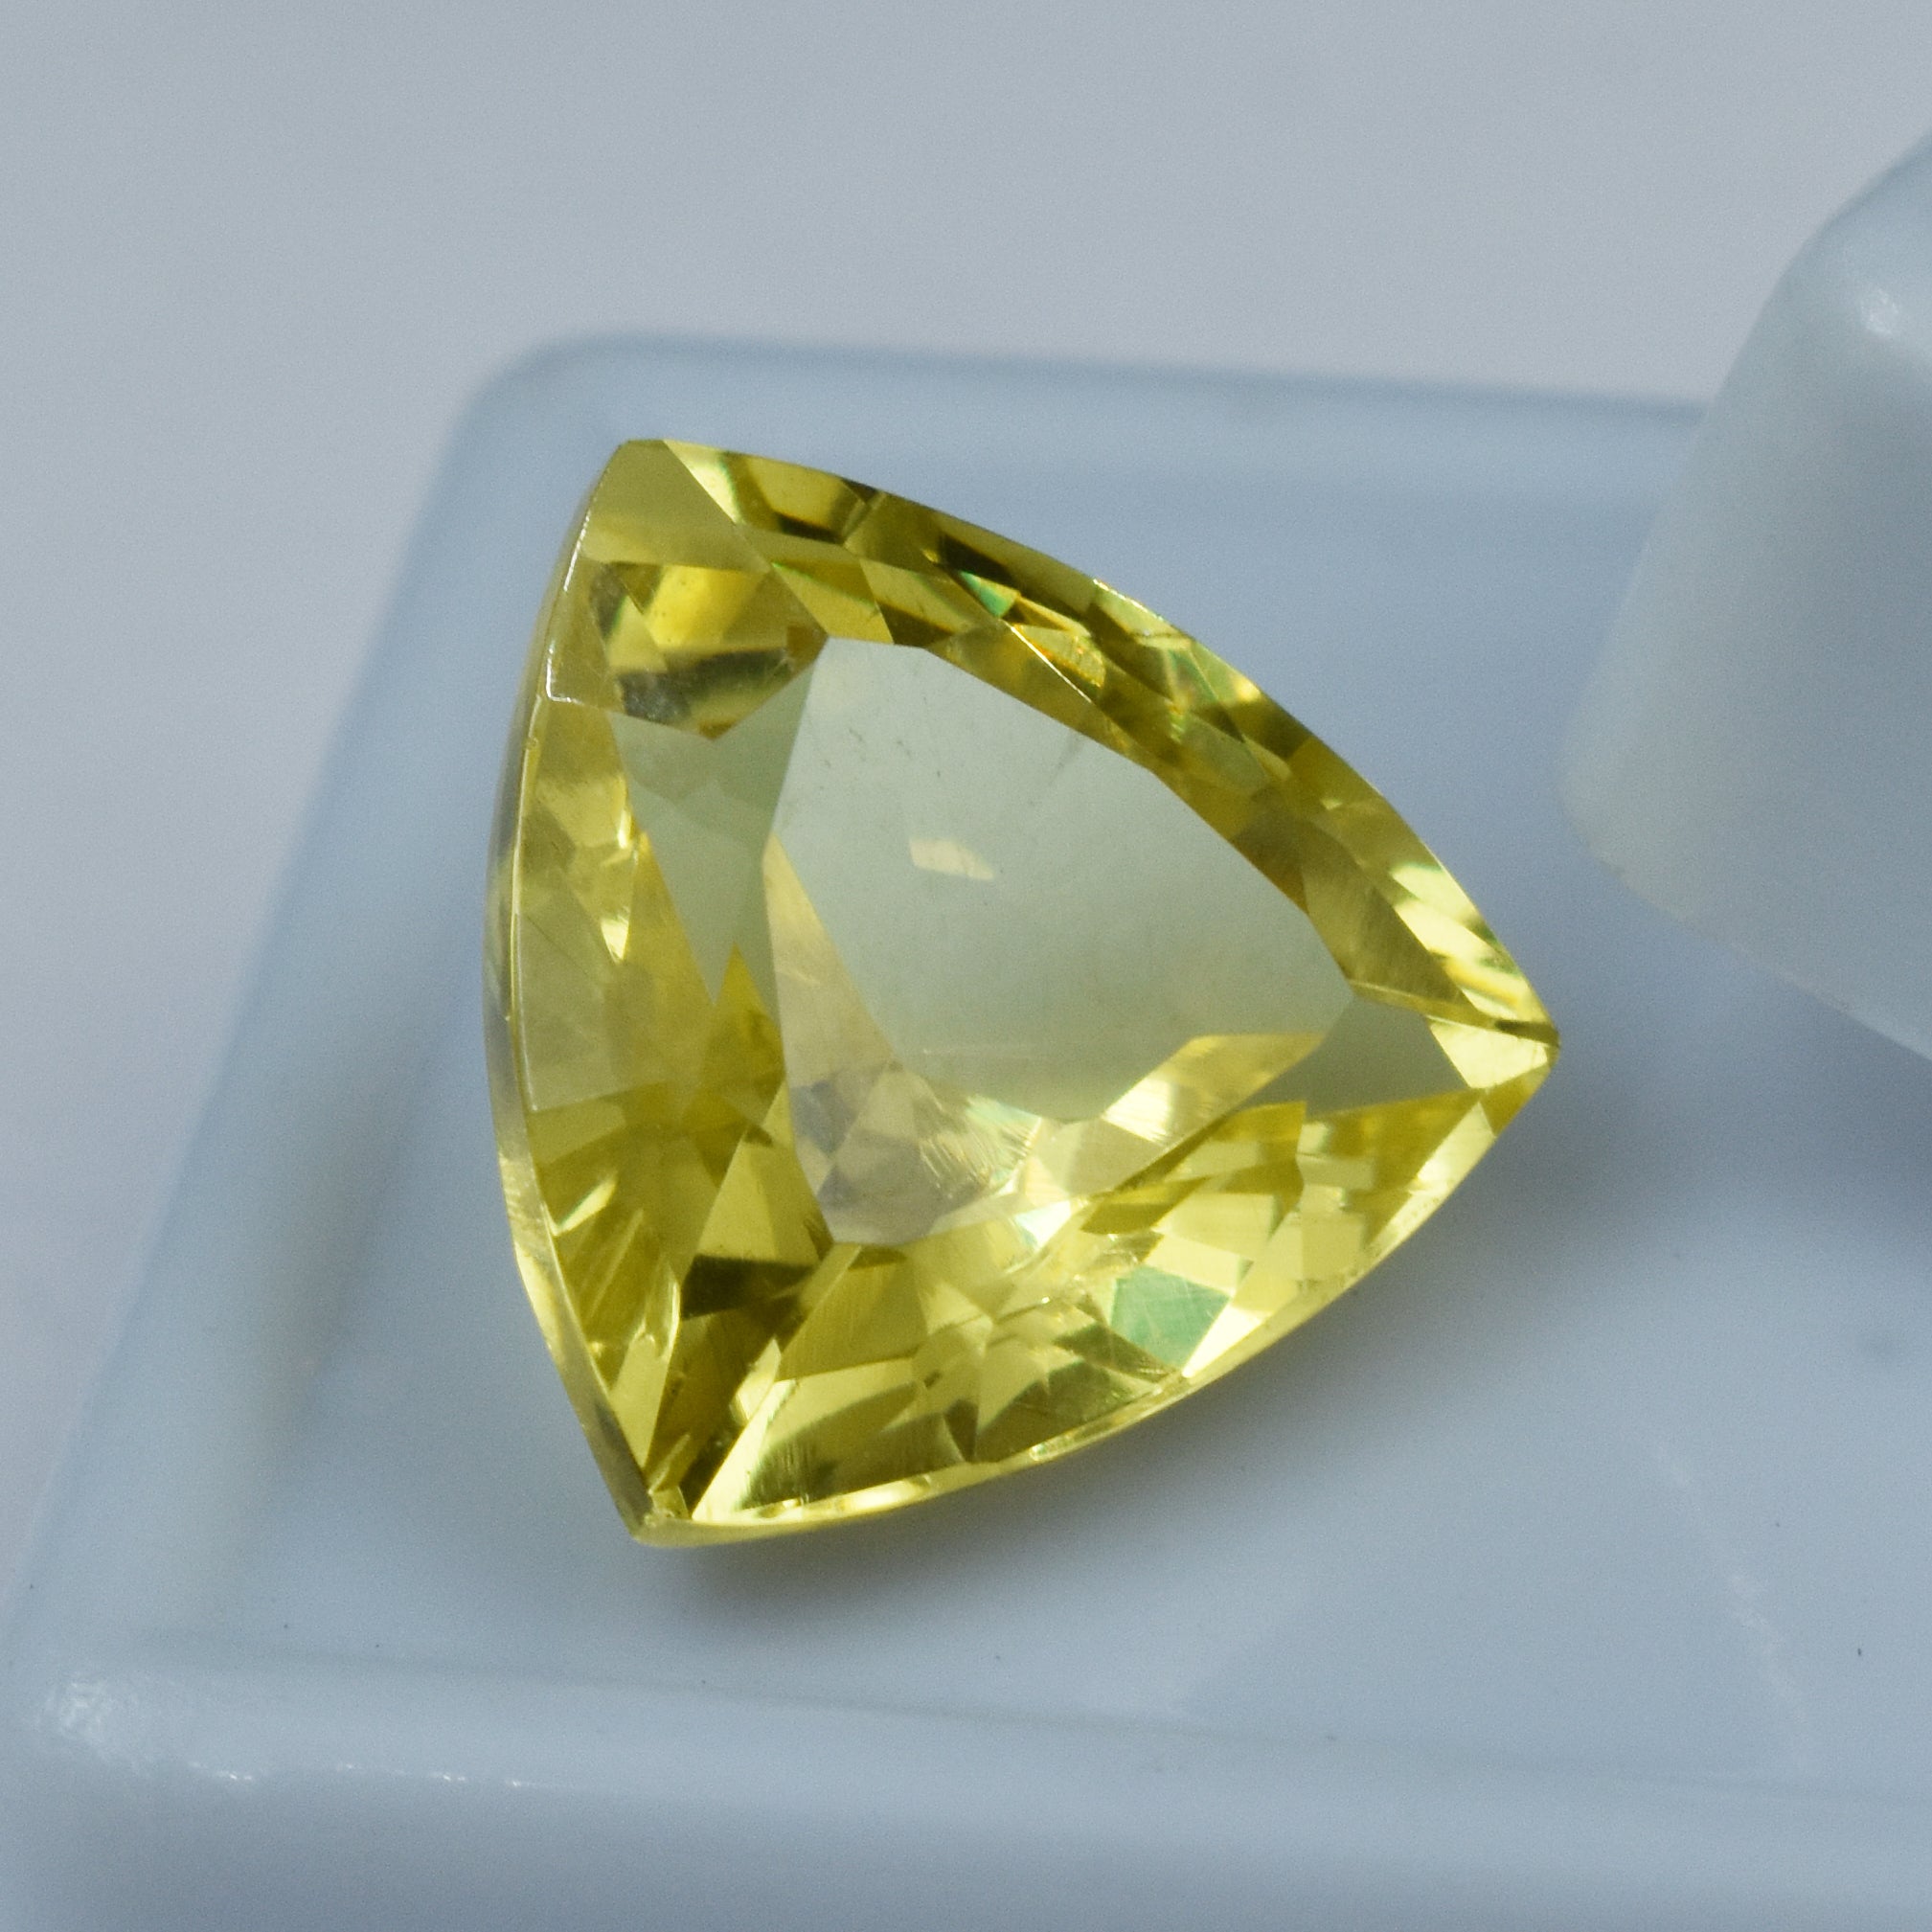 New Best Offer - Certified 10.23 Carat Natural Yellow Sapphire Trillion Shape Loose Gemstone Excellent For Ring And Pendent | Free Delivery & Gift